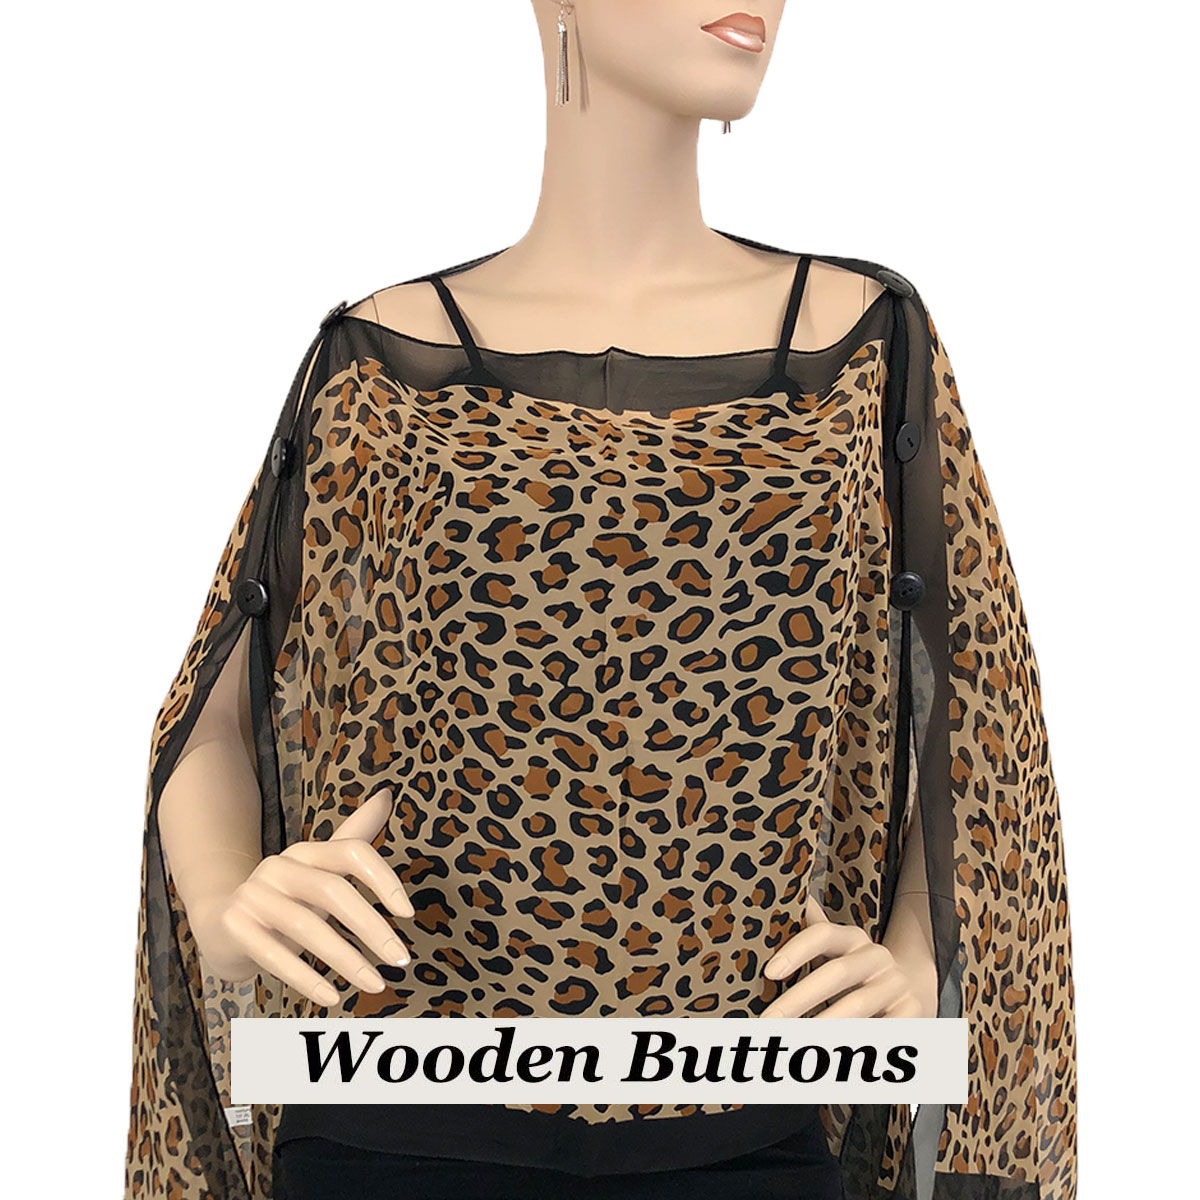 1799 - Silky Six Button Poncho/Cape FLBK1 - Wooden Buttons<br> Floral Black Grey  - 